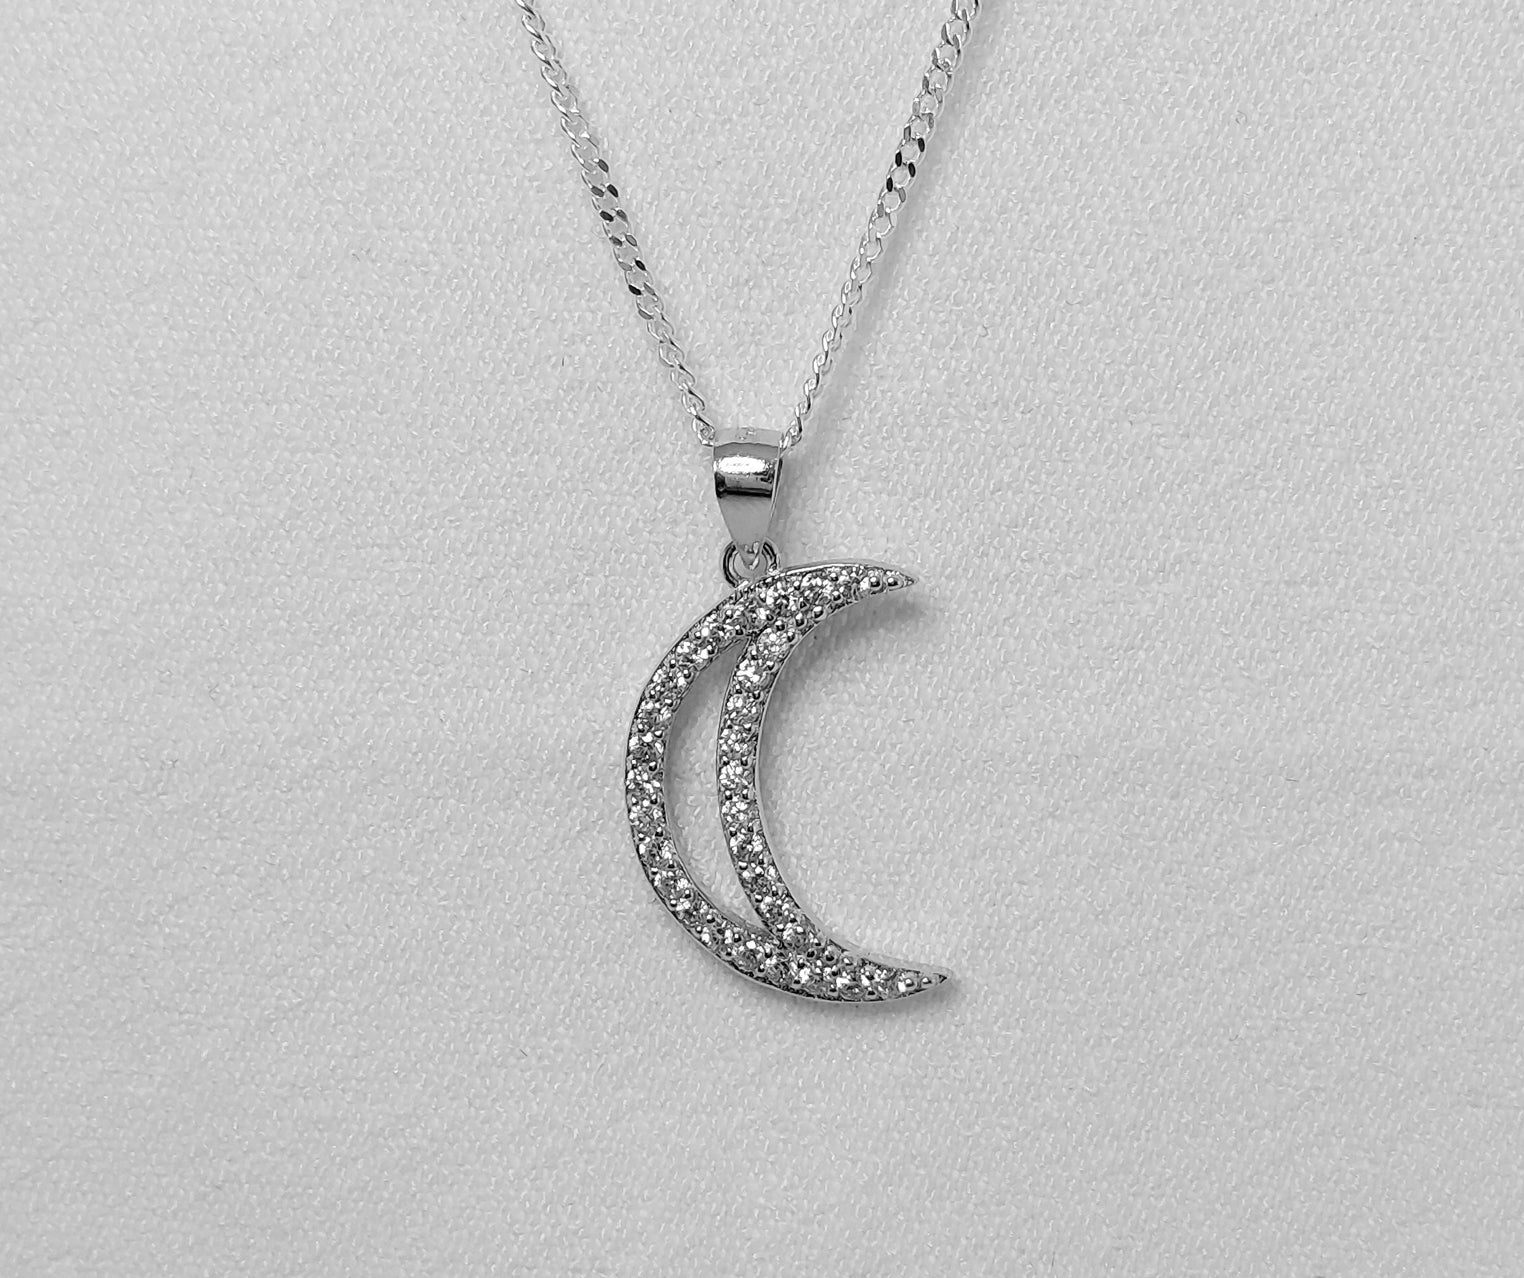 Sterling Silver Crescent Moon pendant with cubic zirconia stones